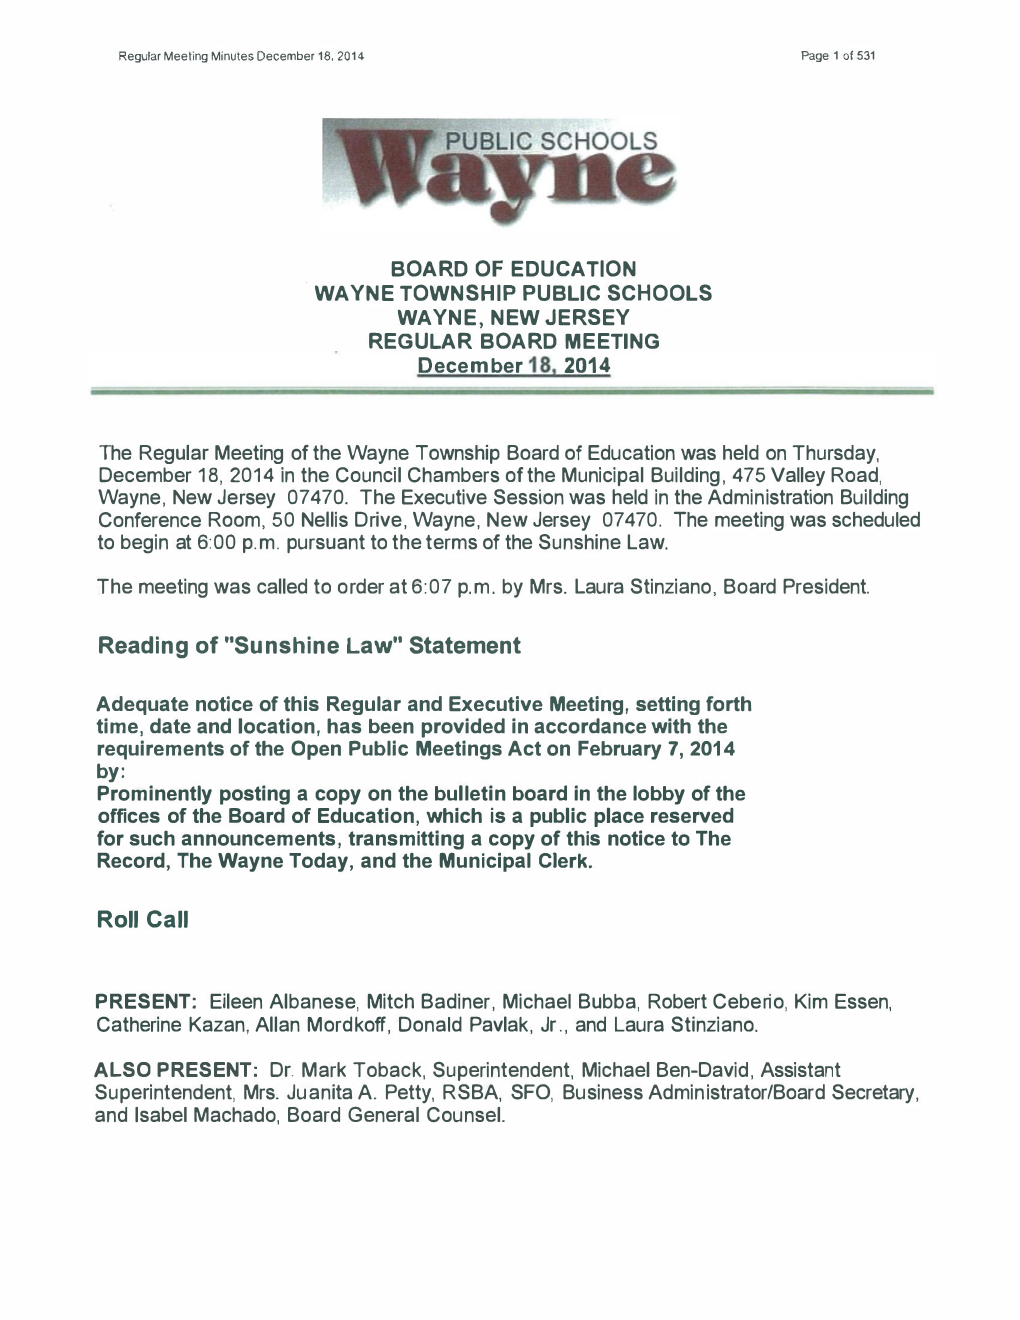 The Regular Meeting of the Wayne Township Board of Education Was Held on Thursday, December 18,2014 in the Council Chambers of T